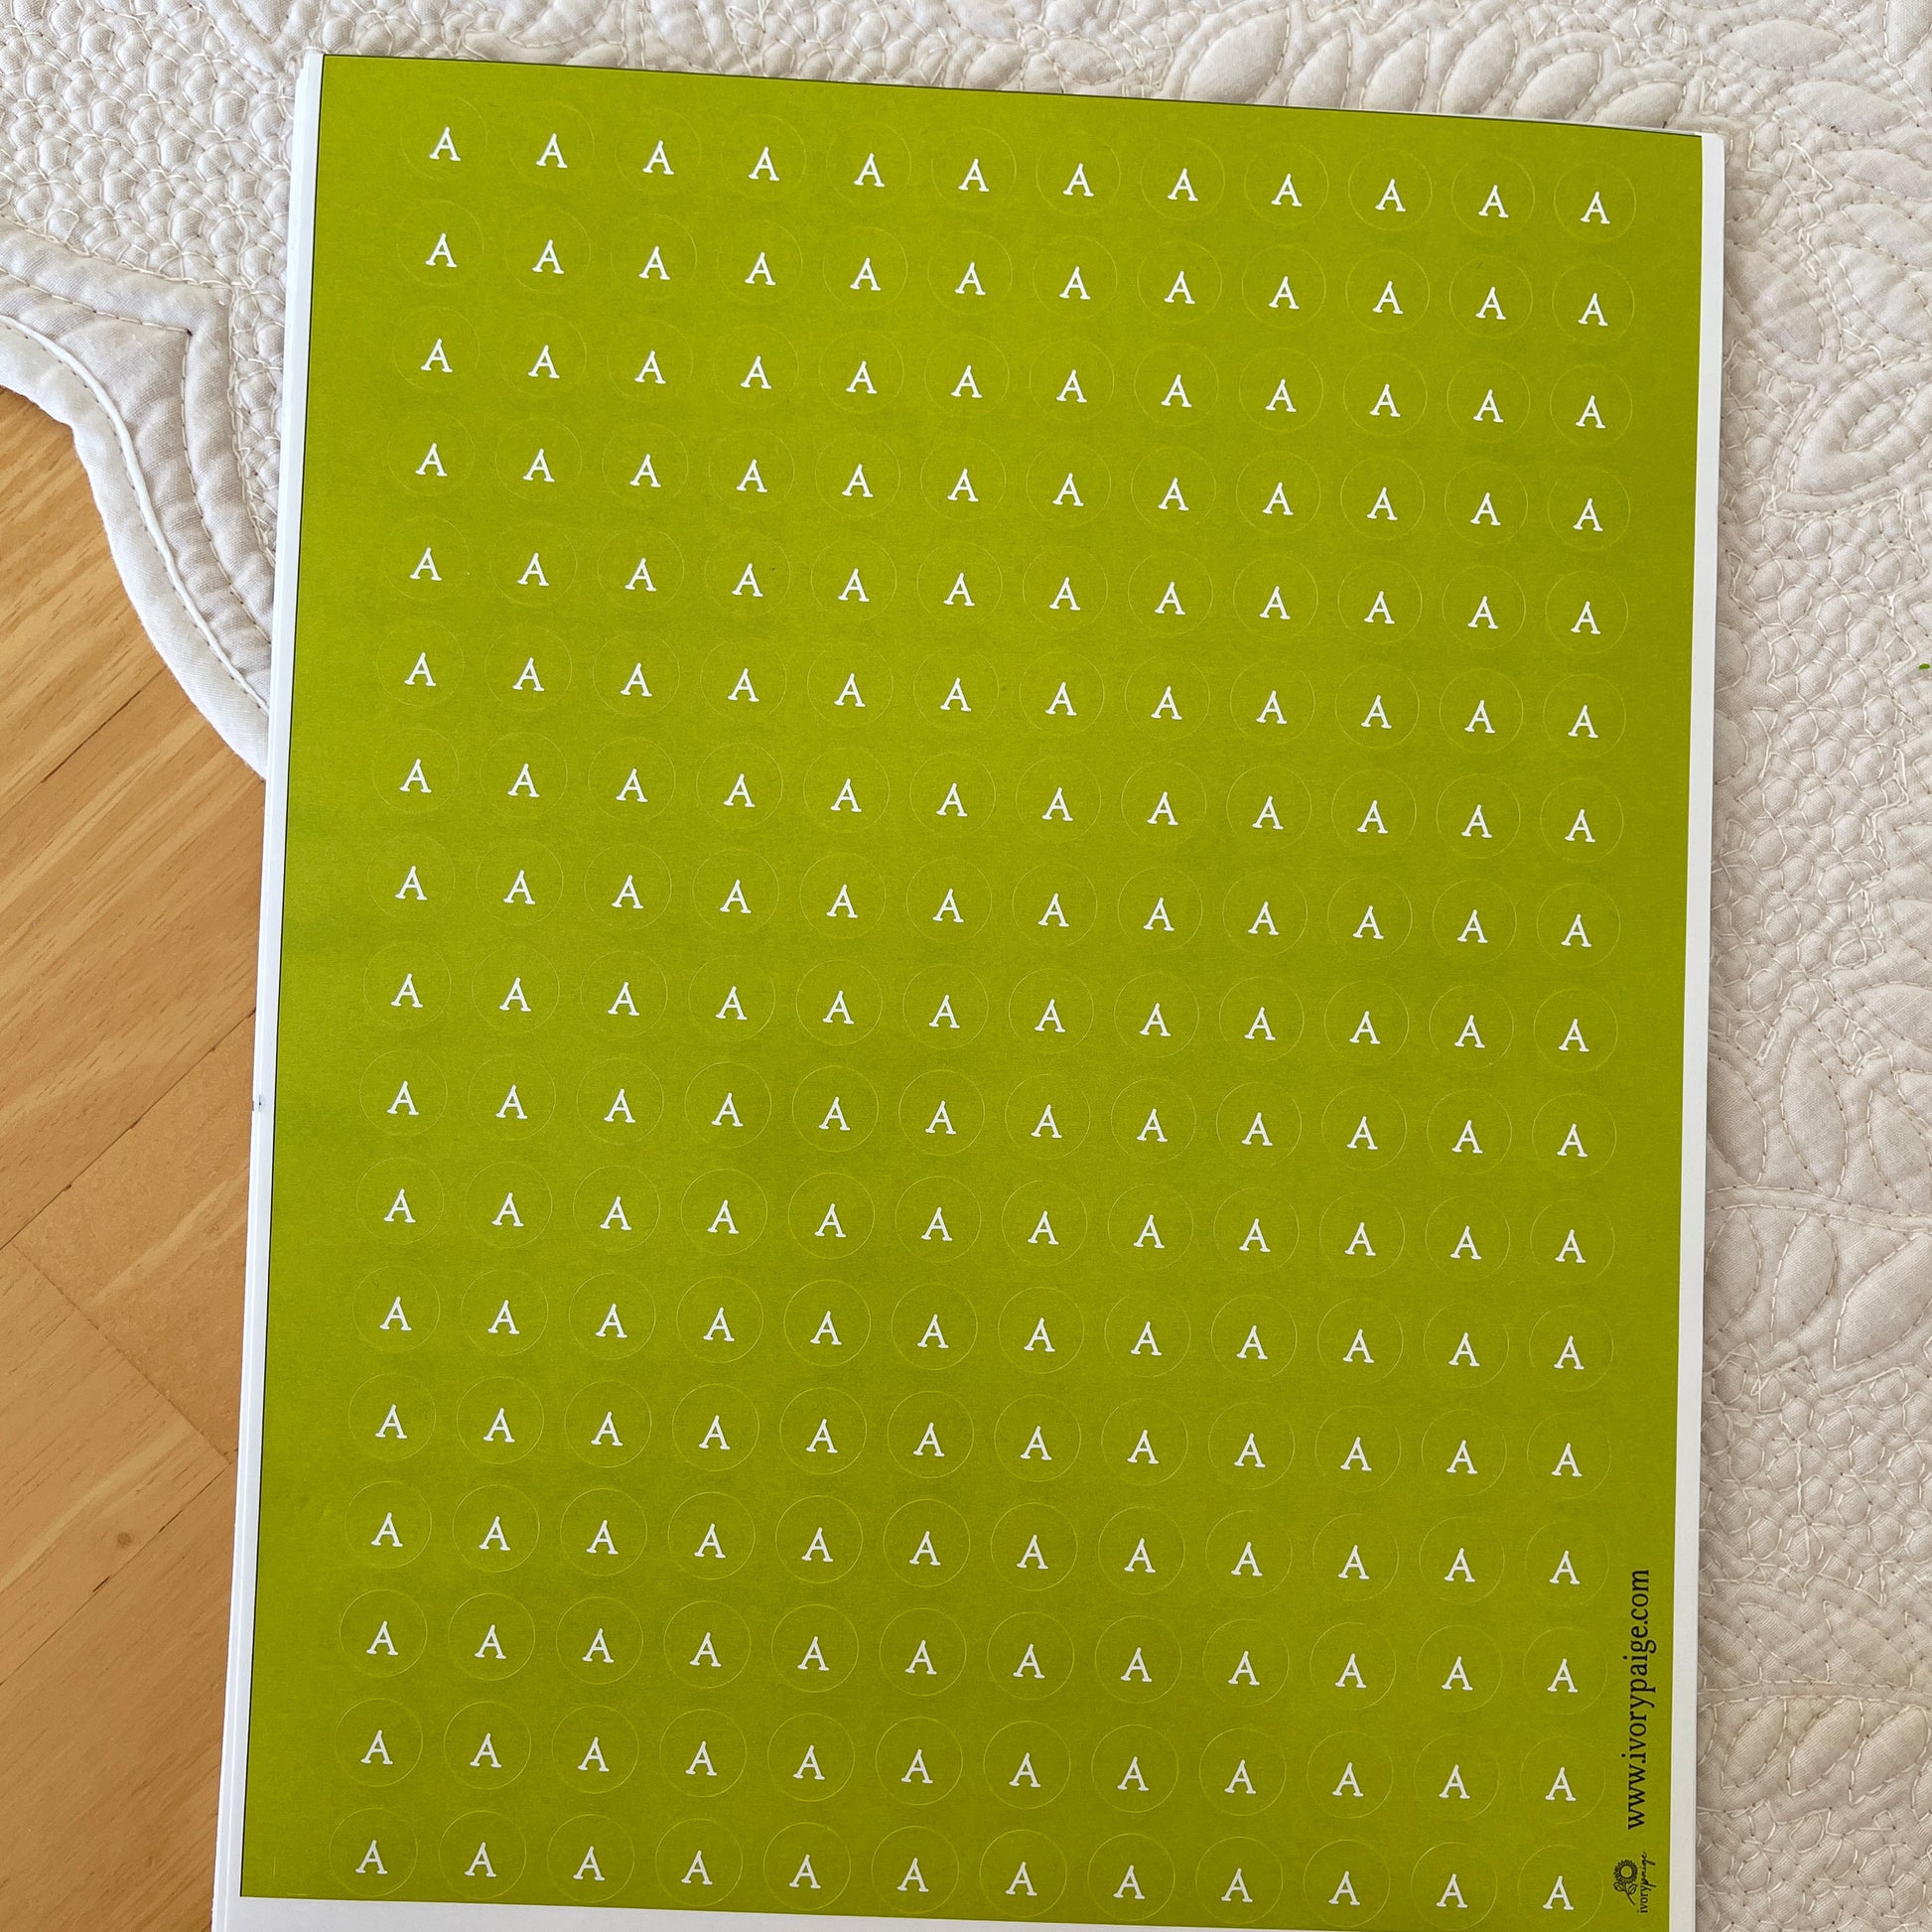 Green letter A stickers for quilt sewing pieces